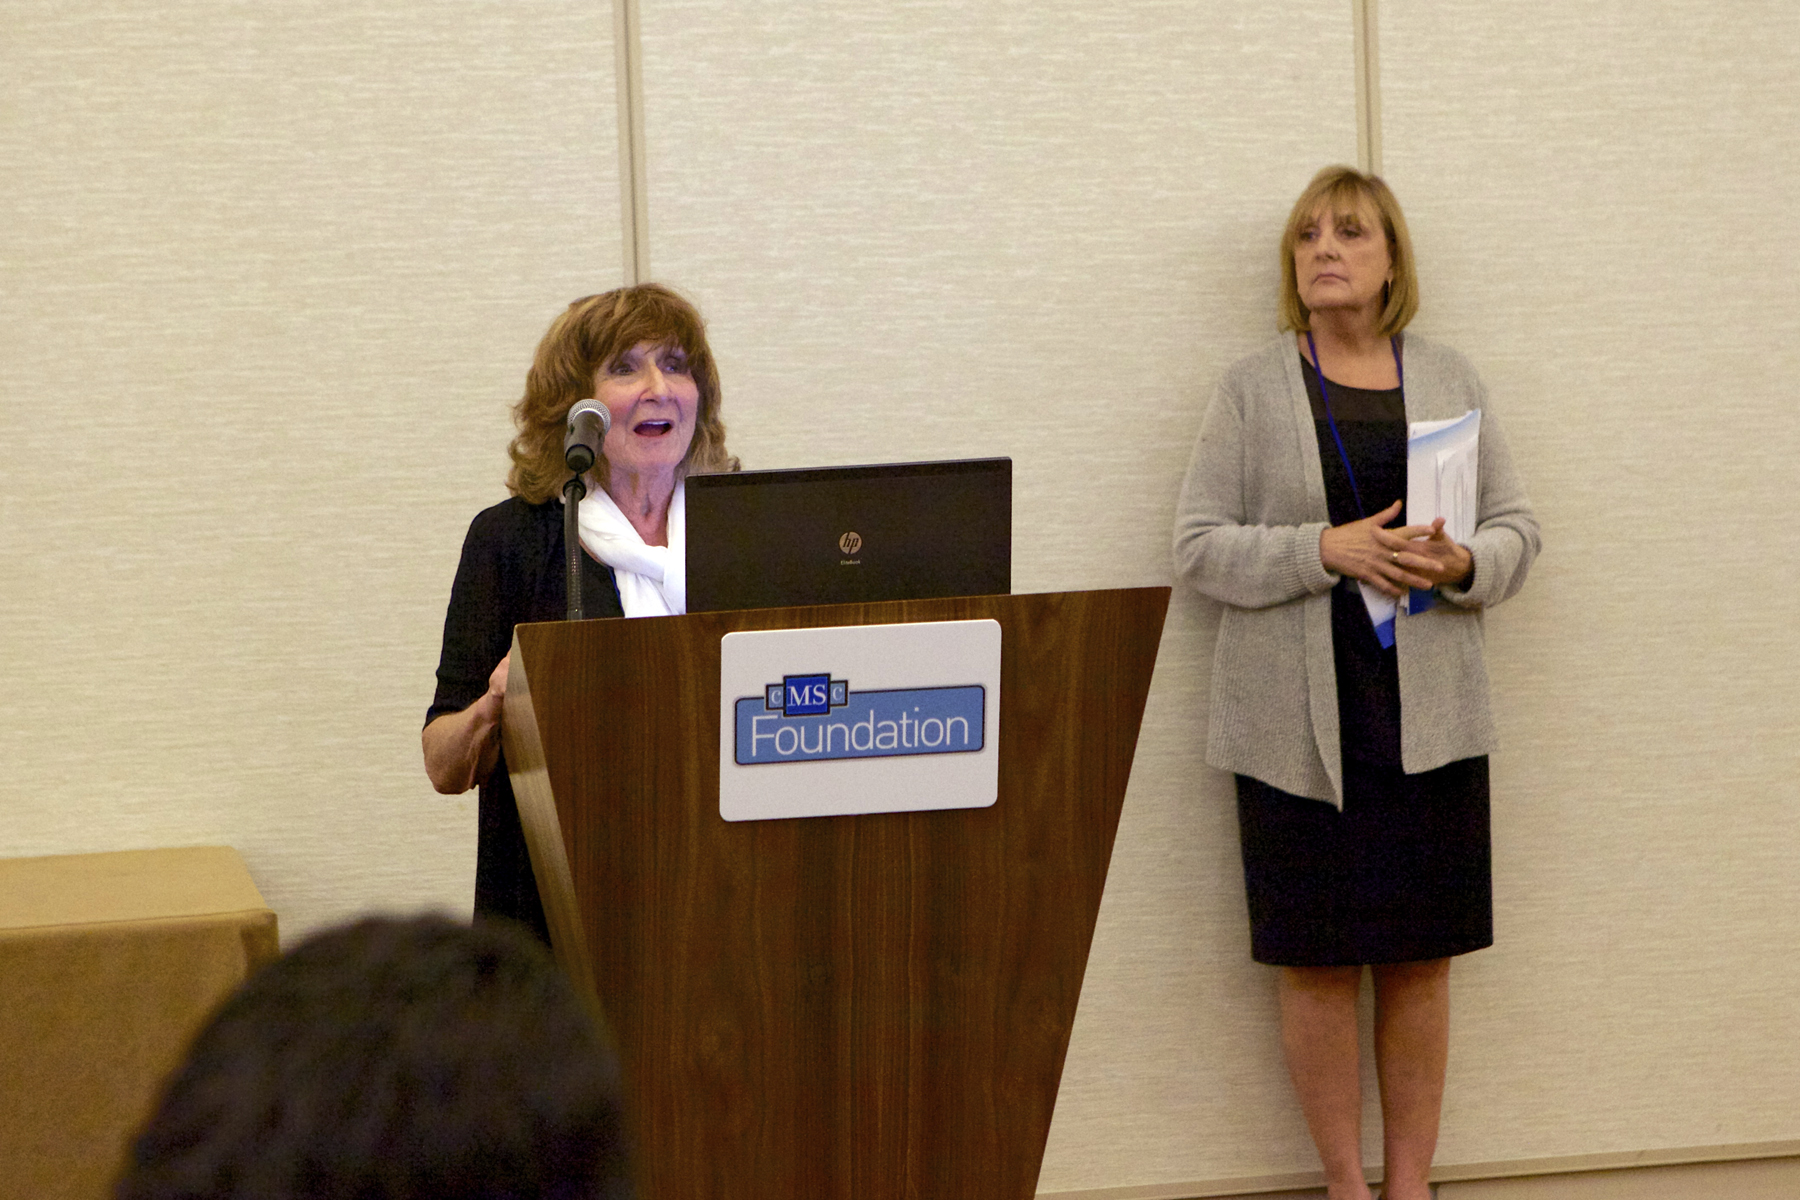 June Halper introducing Judy Katterhenrich, Executive Director of the Foundation of CMSC, at the FCMSC luncheon